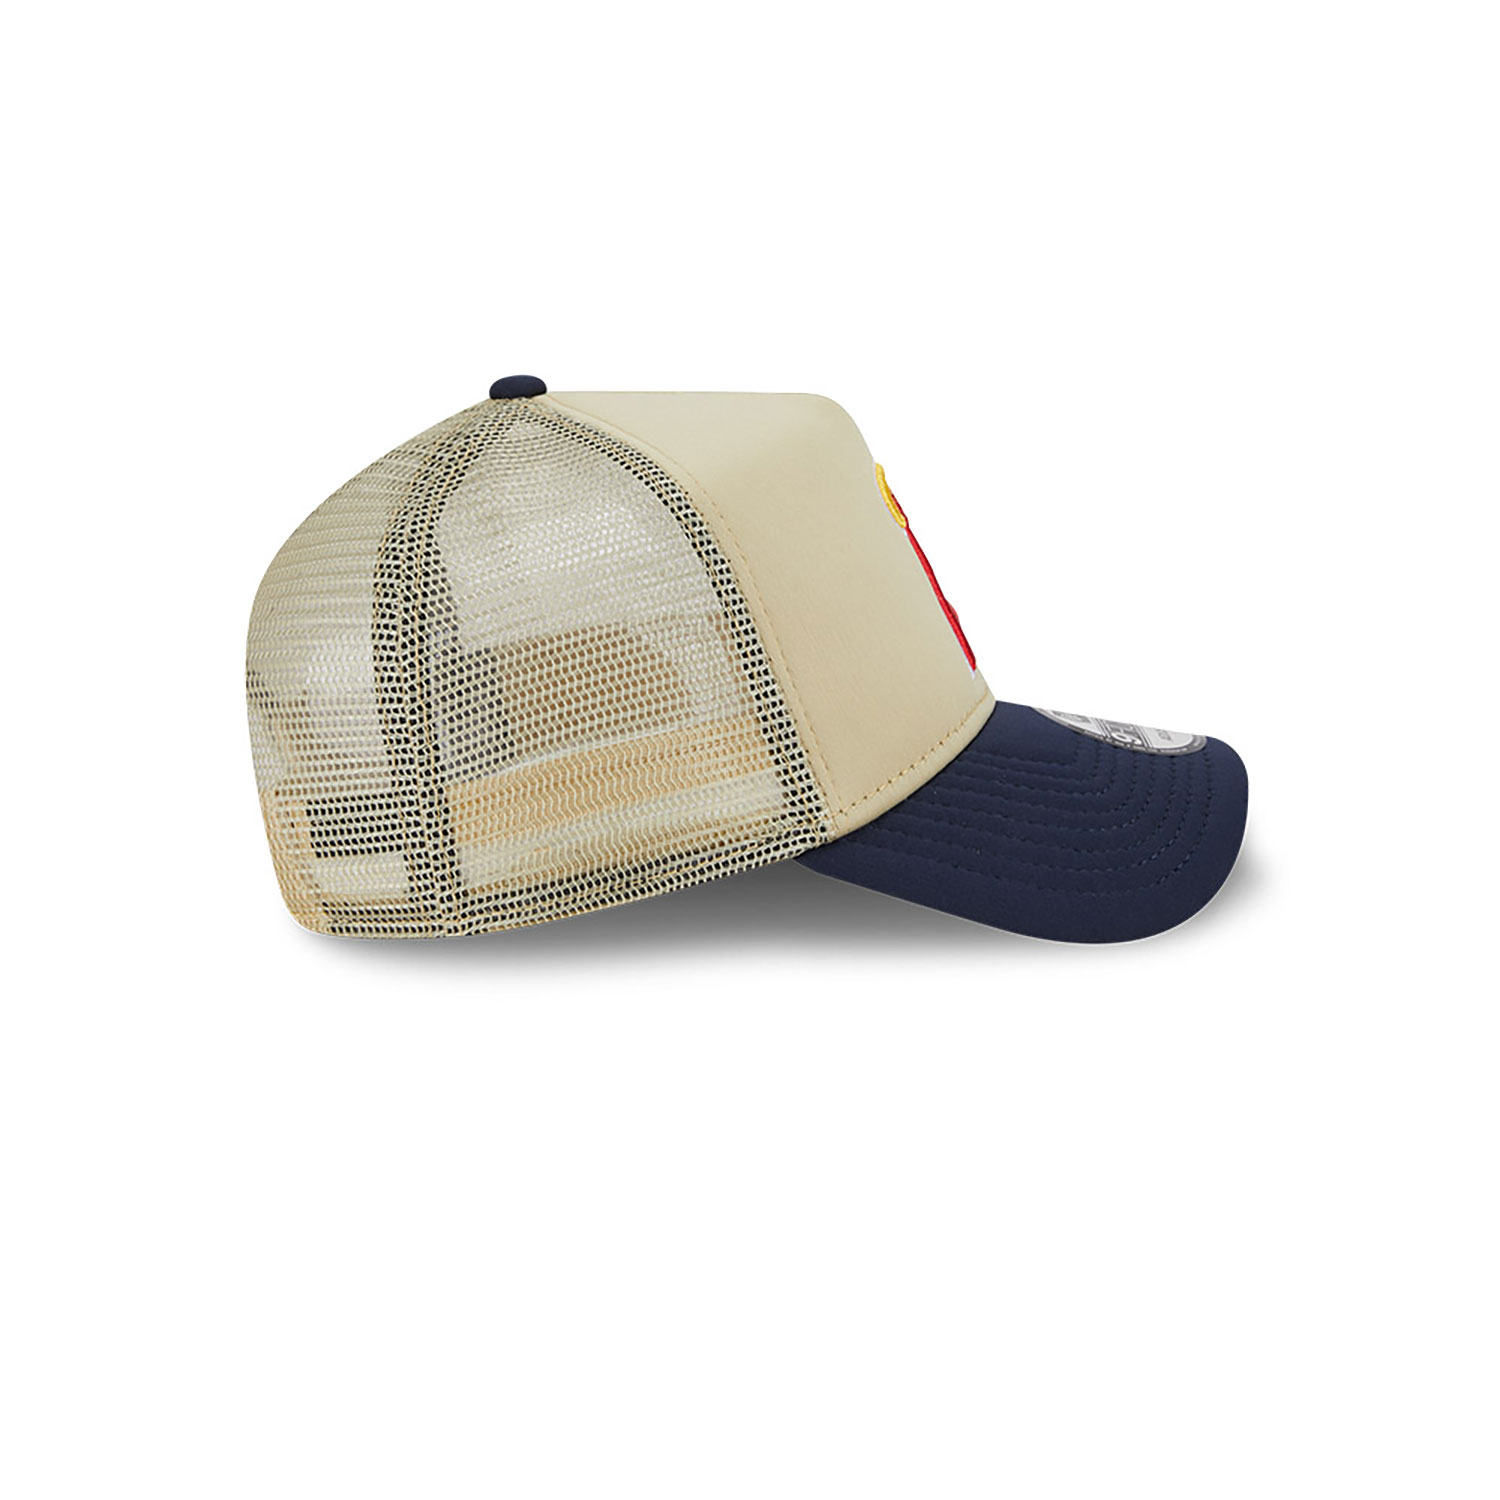 California Angels All Day Beige 9FORTY A-Frame Trucker Cap